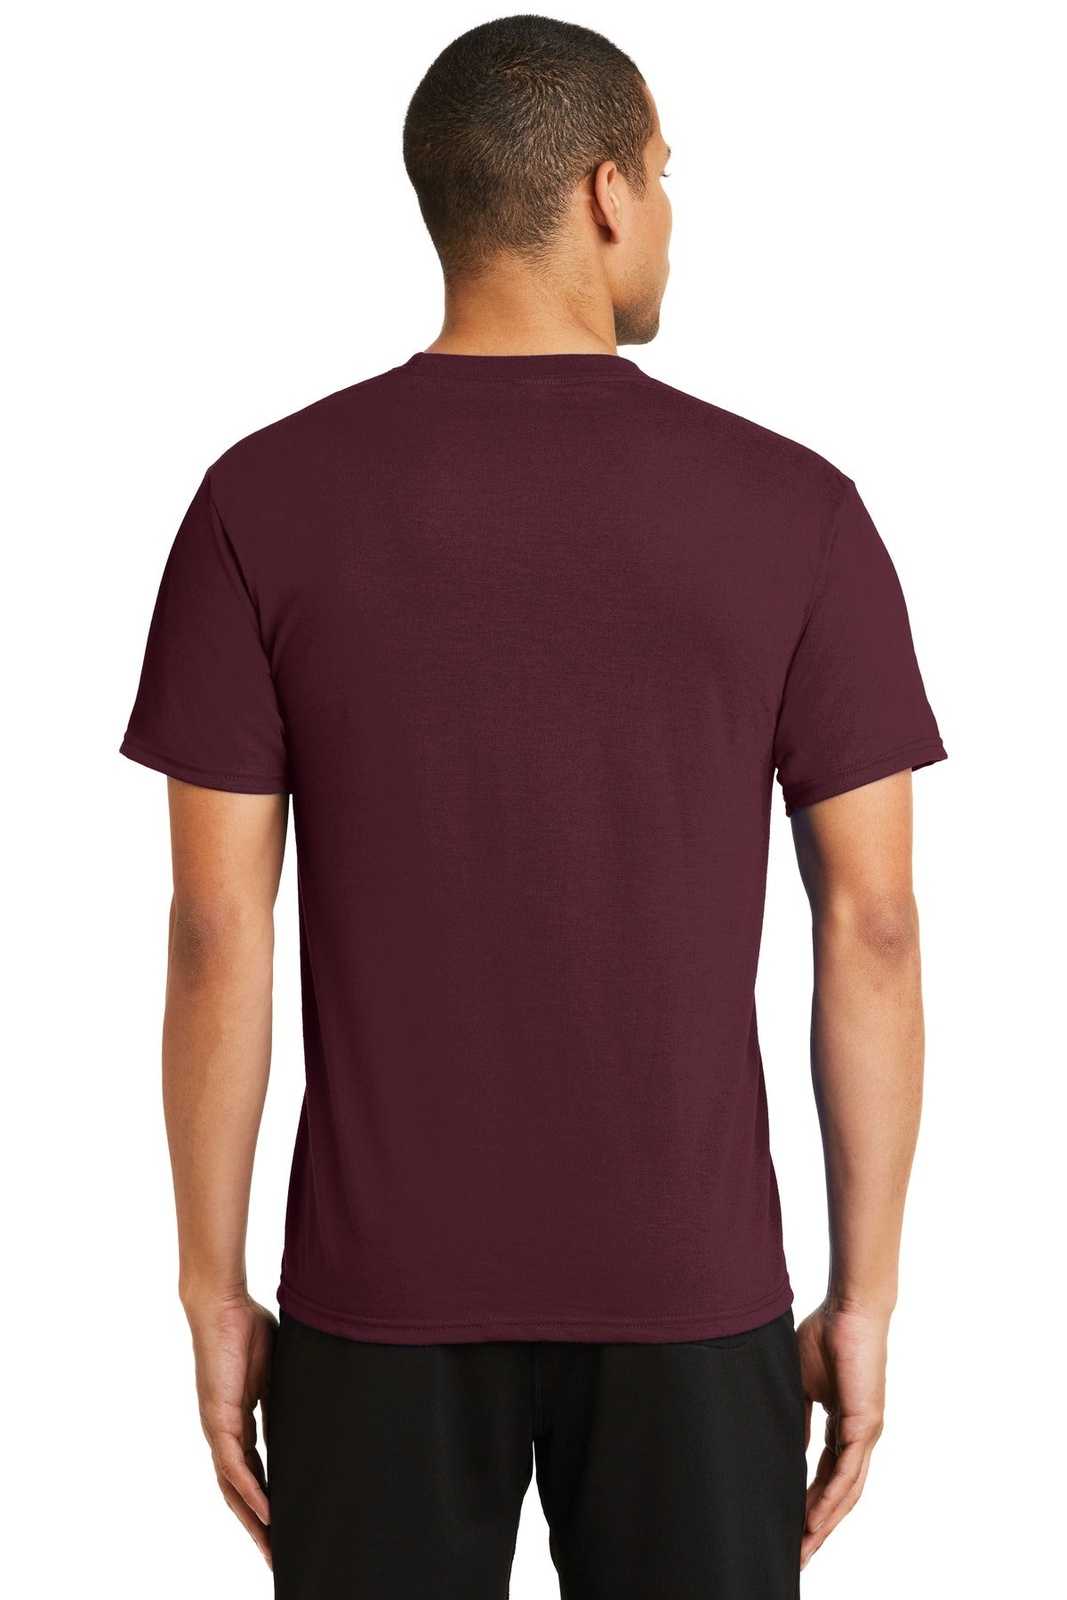 Port &amp; Company PC381 Performance Blend Tee - Athletic Maroon - HIT a Double - 2